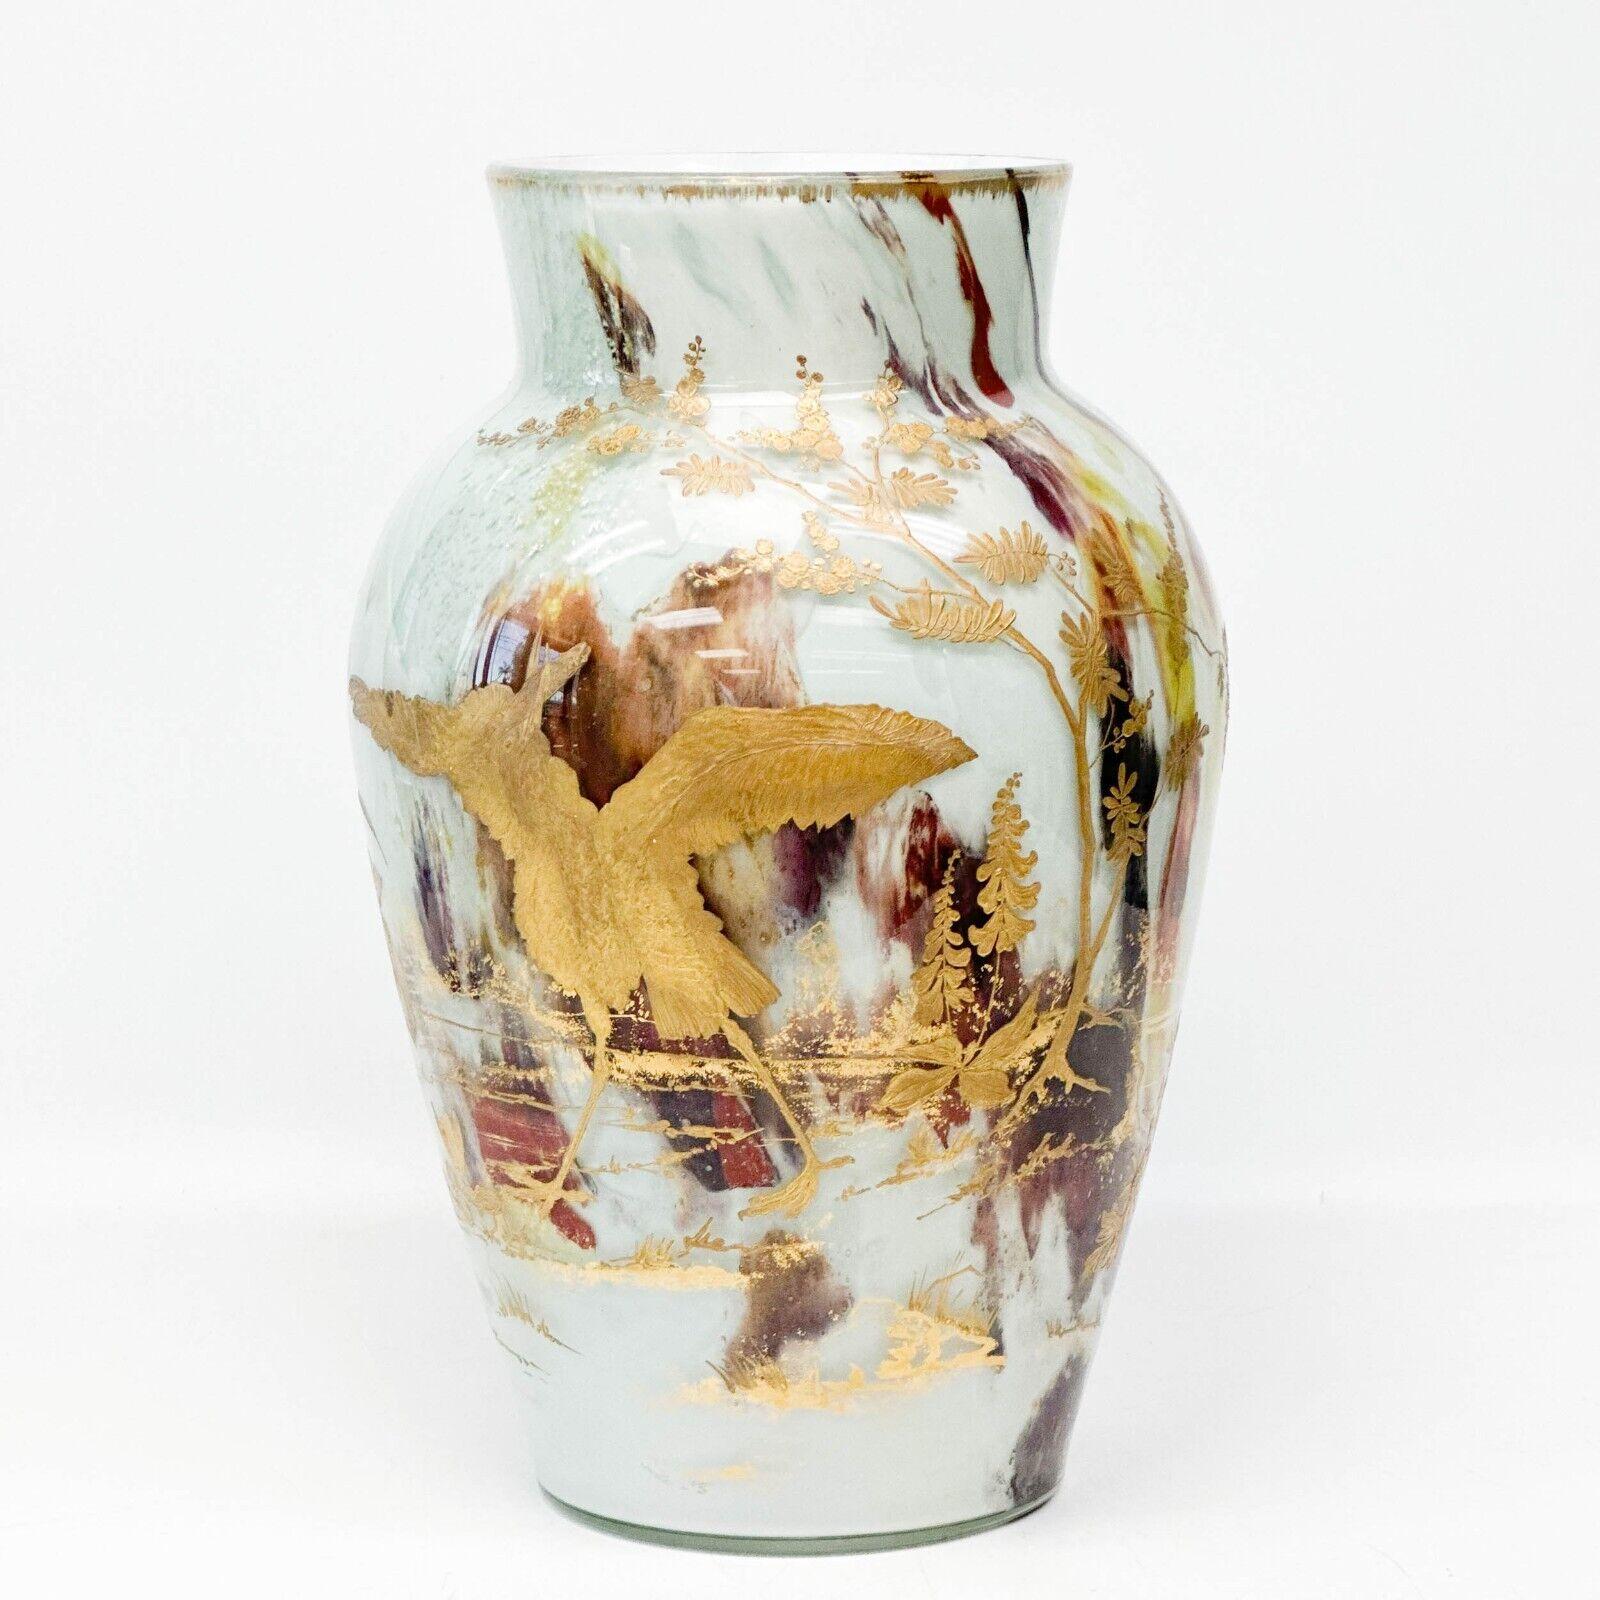  Ernest Baptiste Leveille Opaque Art Glass Vase, c1900 Gilt Florals

Opaque glass internally decorated with yellow, red, and blue, silver metal flakes. Raised gilt floral decoration to the exterior of  thistles, irises, and a crane, gilt to the rim.